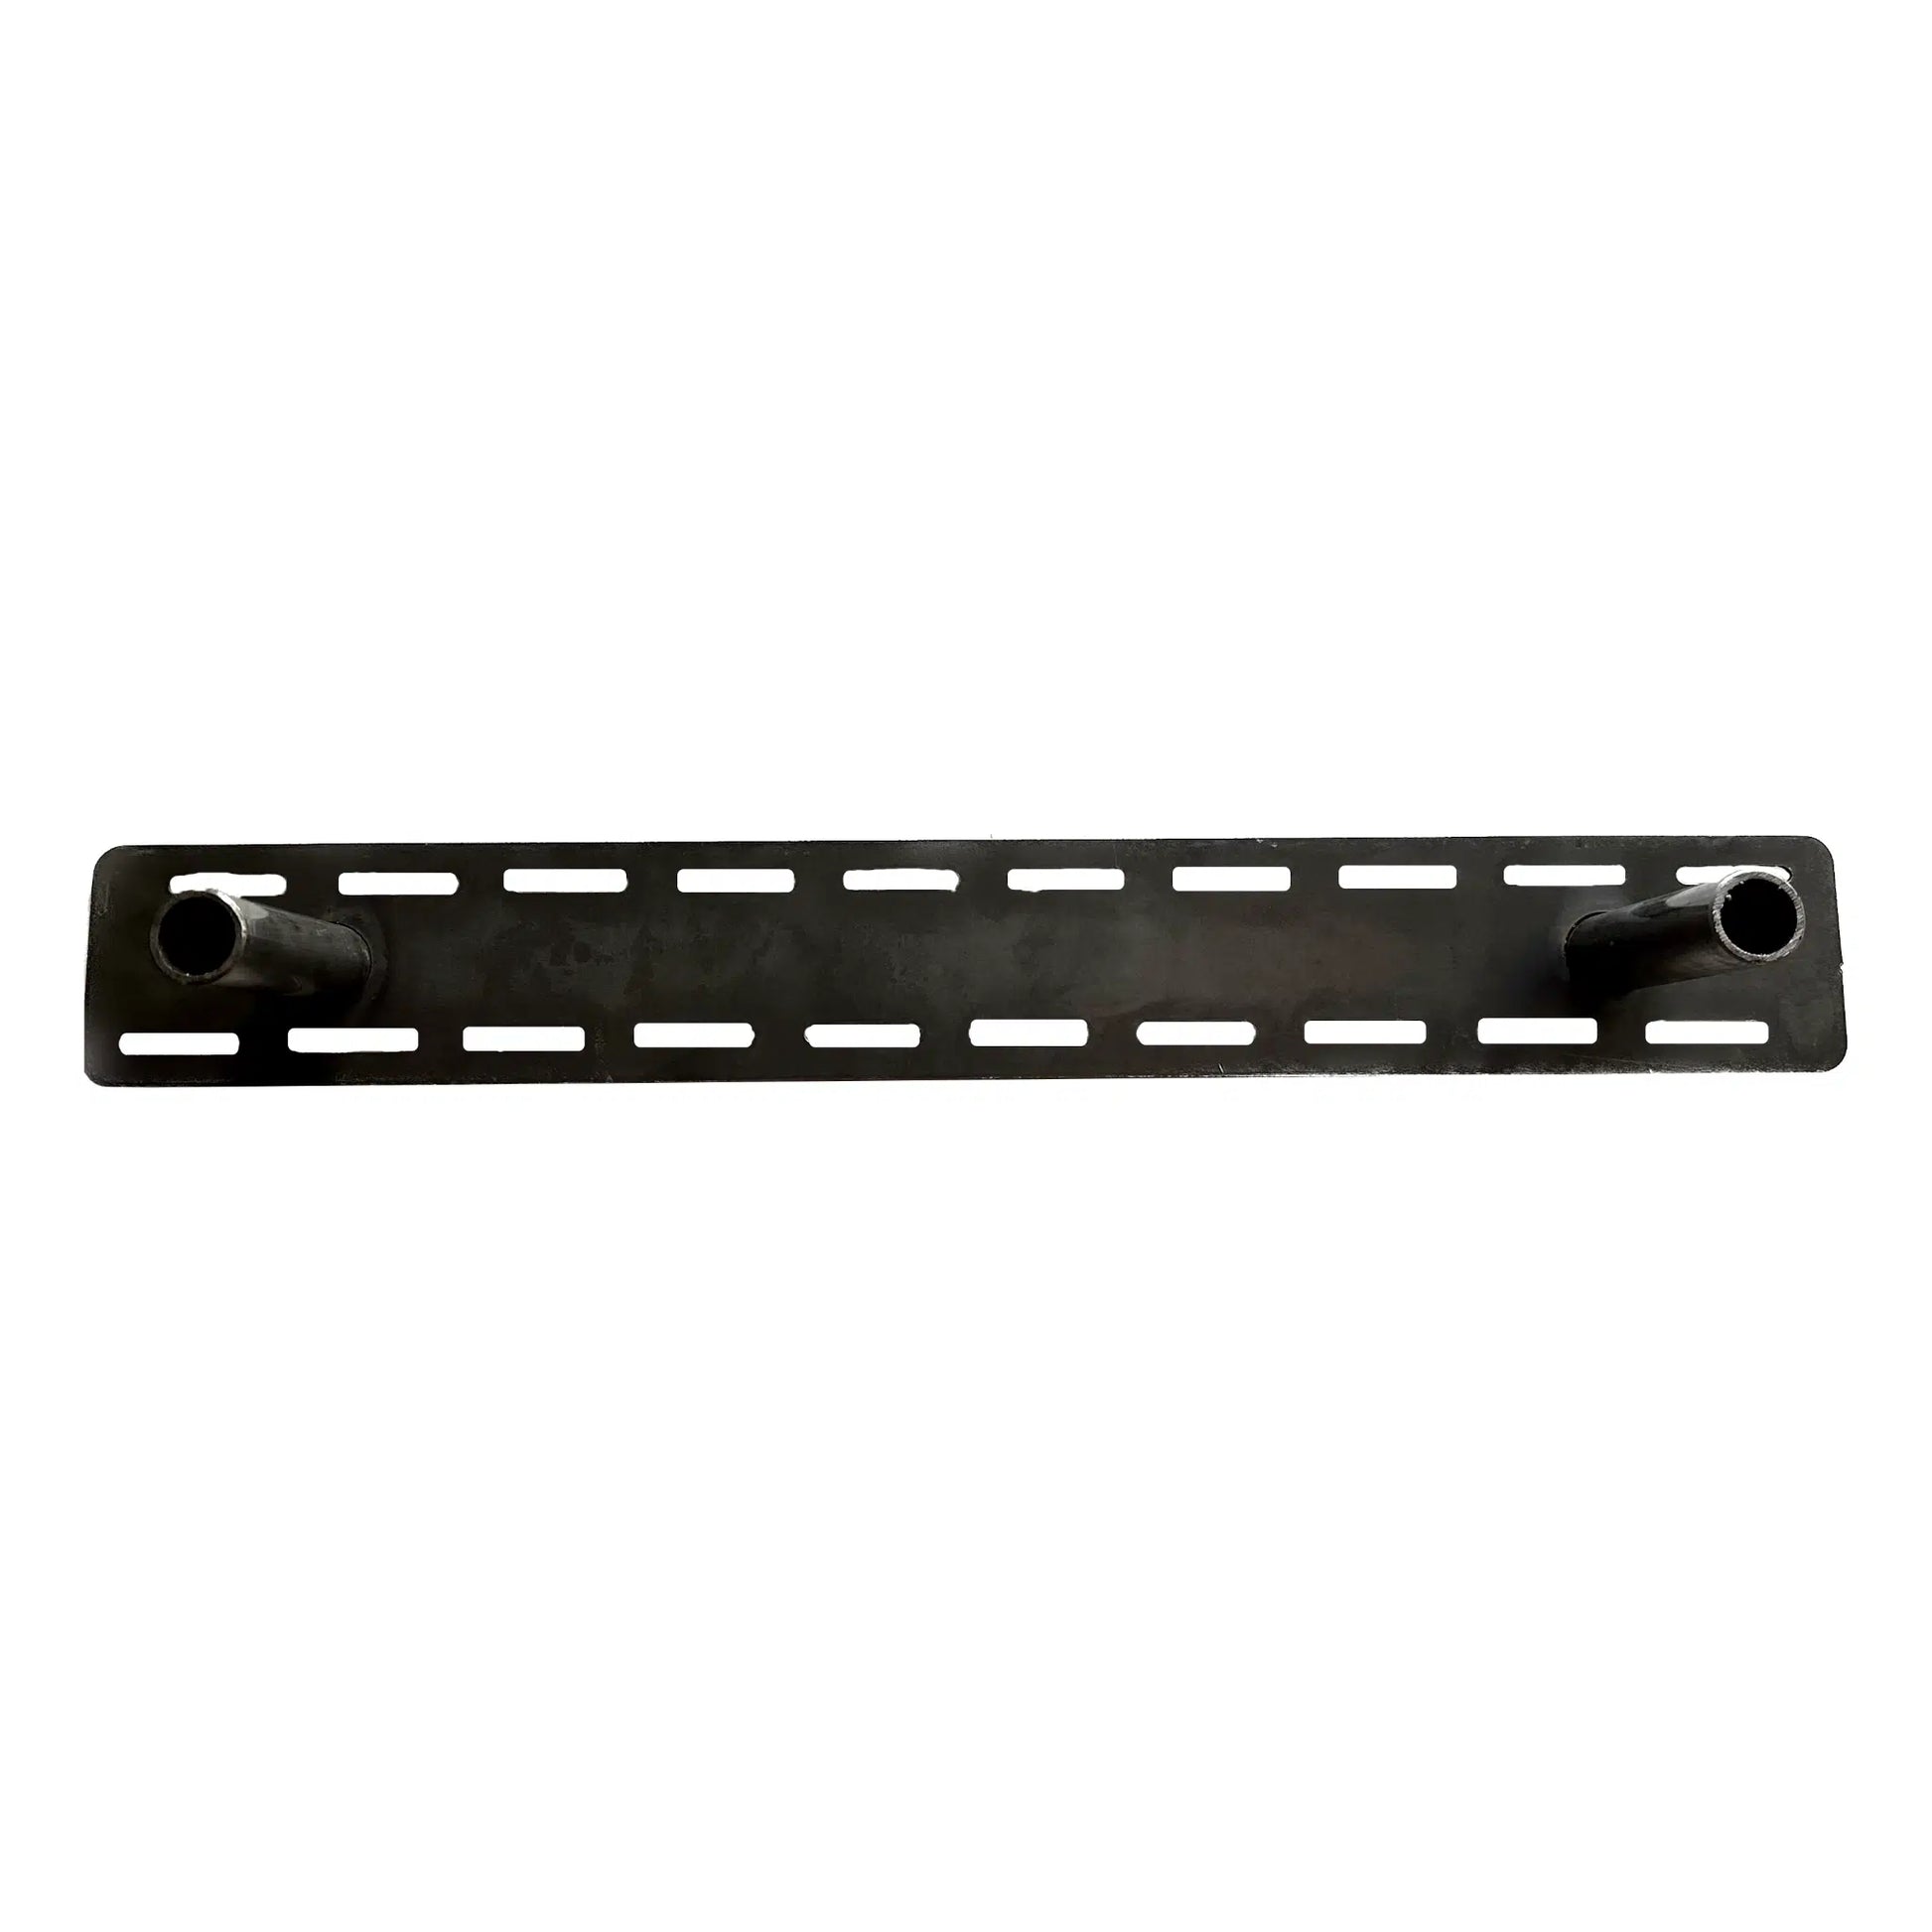 steel floating bracket shown face forward with a plate on the back and slots for screws around perimeter of plate. Two rods extend out from plate that will go into mantel or shelf for mounting.